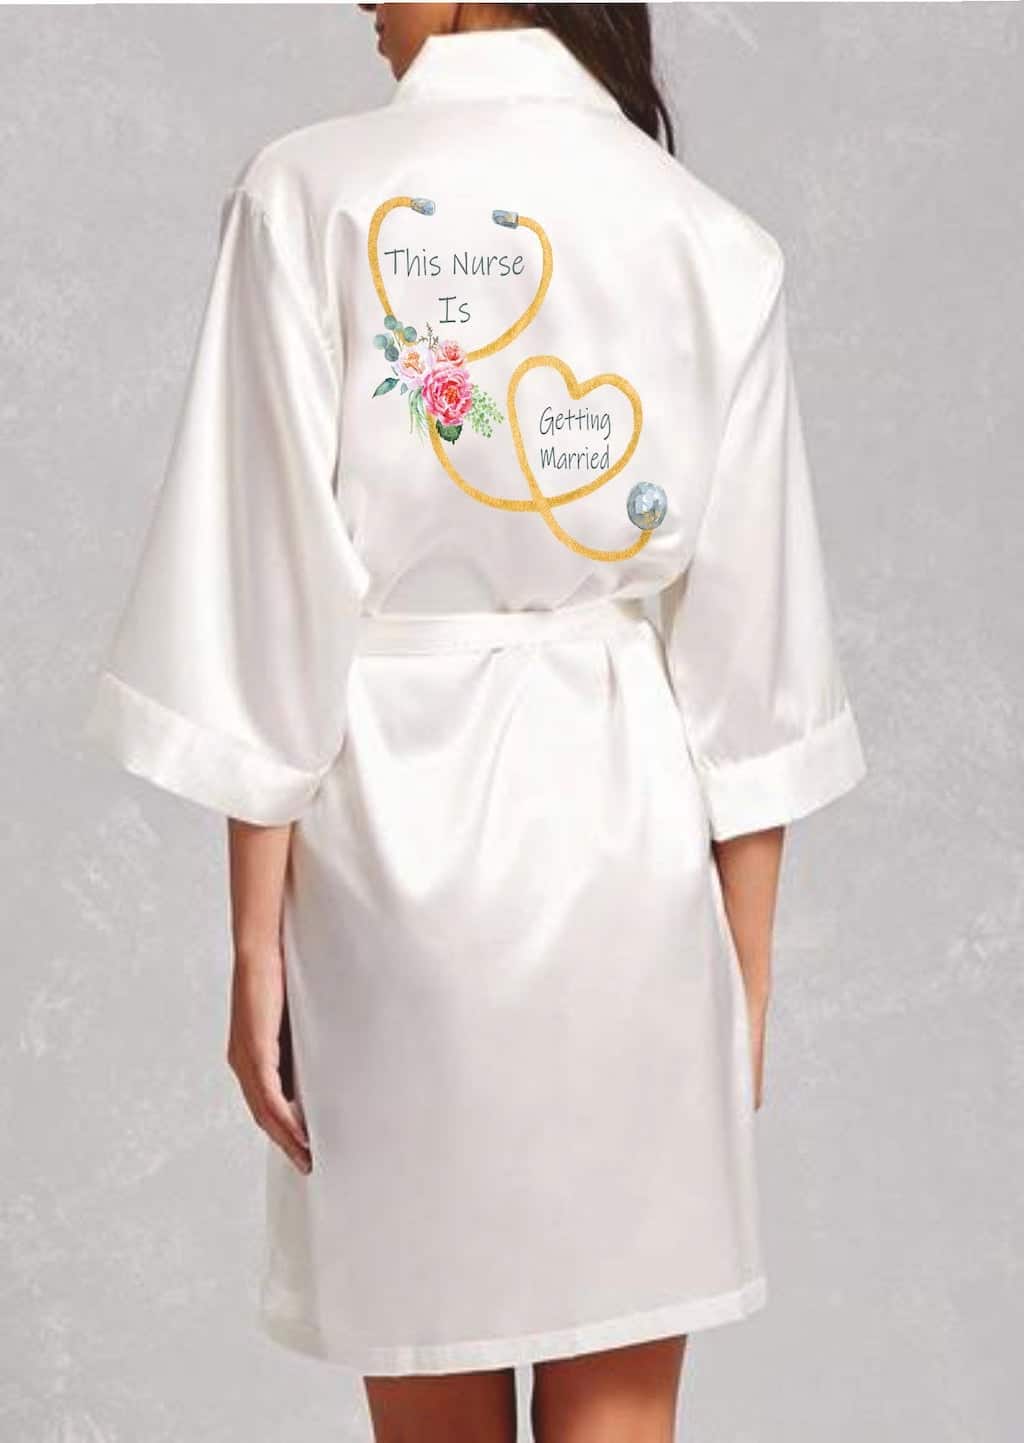 This Nurse Is Getting Married Robe - Gifts For Nurses Getting Married